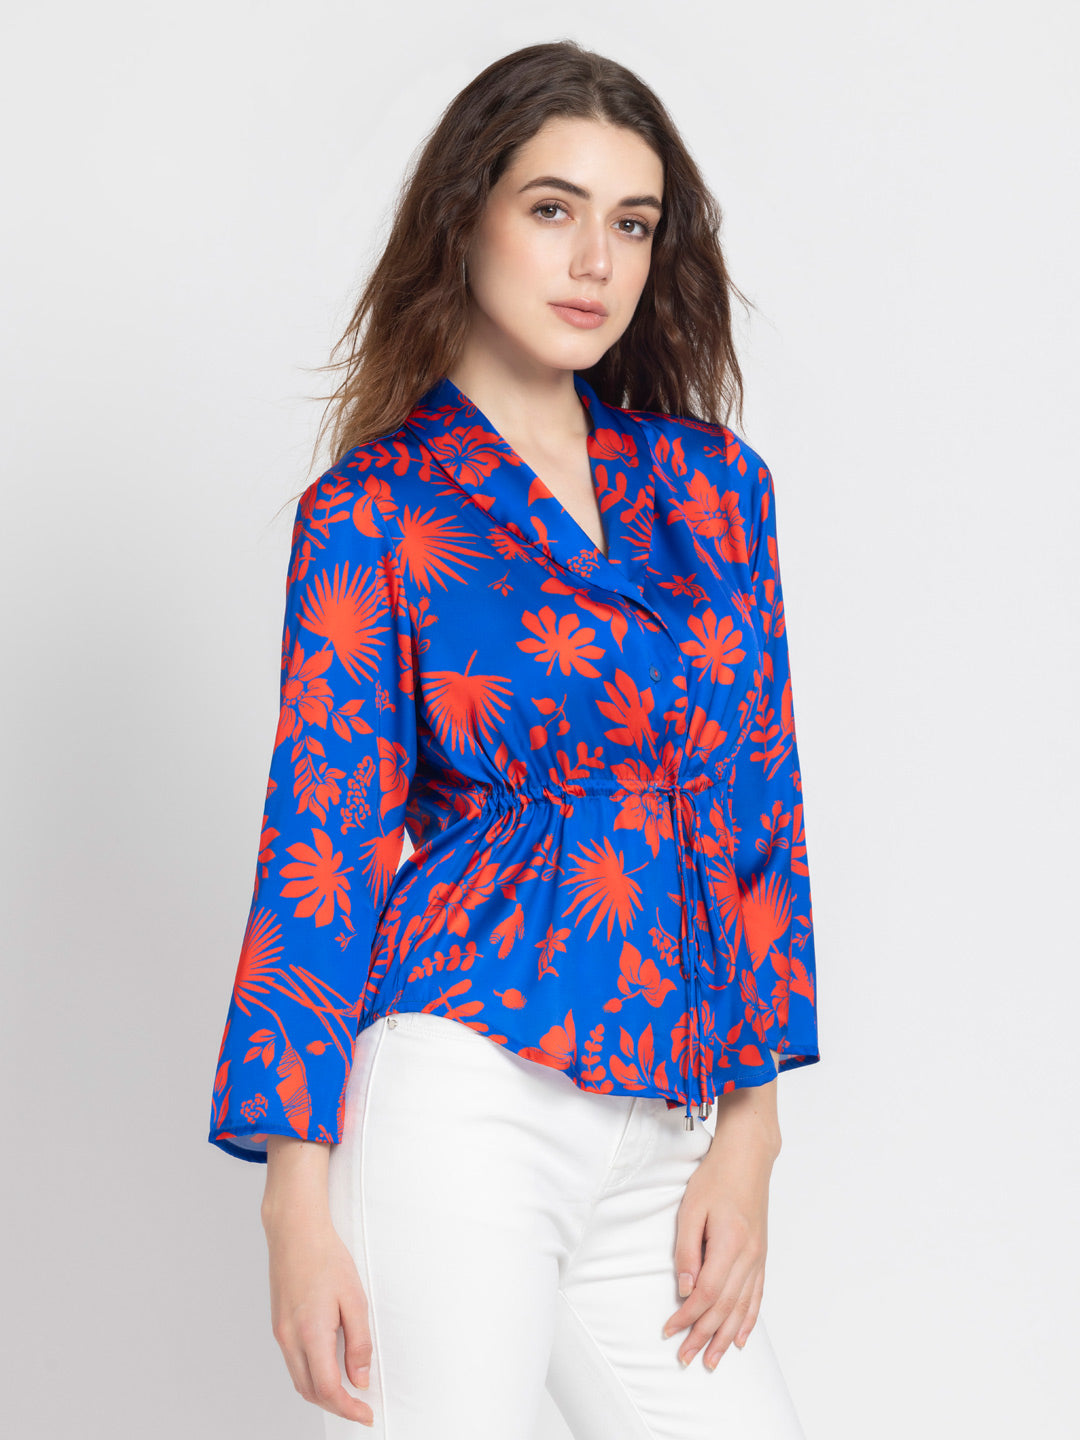 Libby Cinched Shirt Jacket from SHAYE , Shirt for women